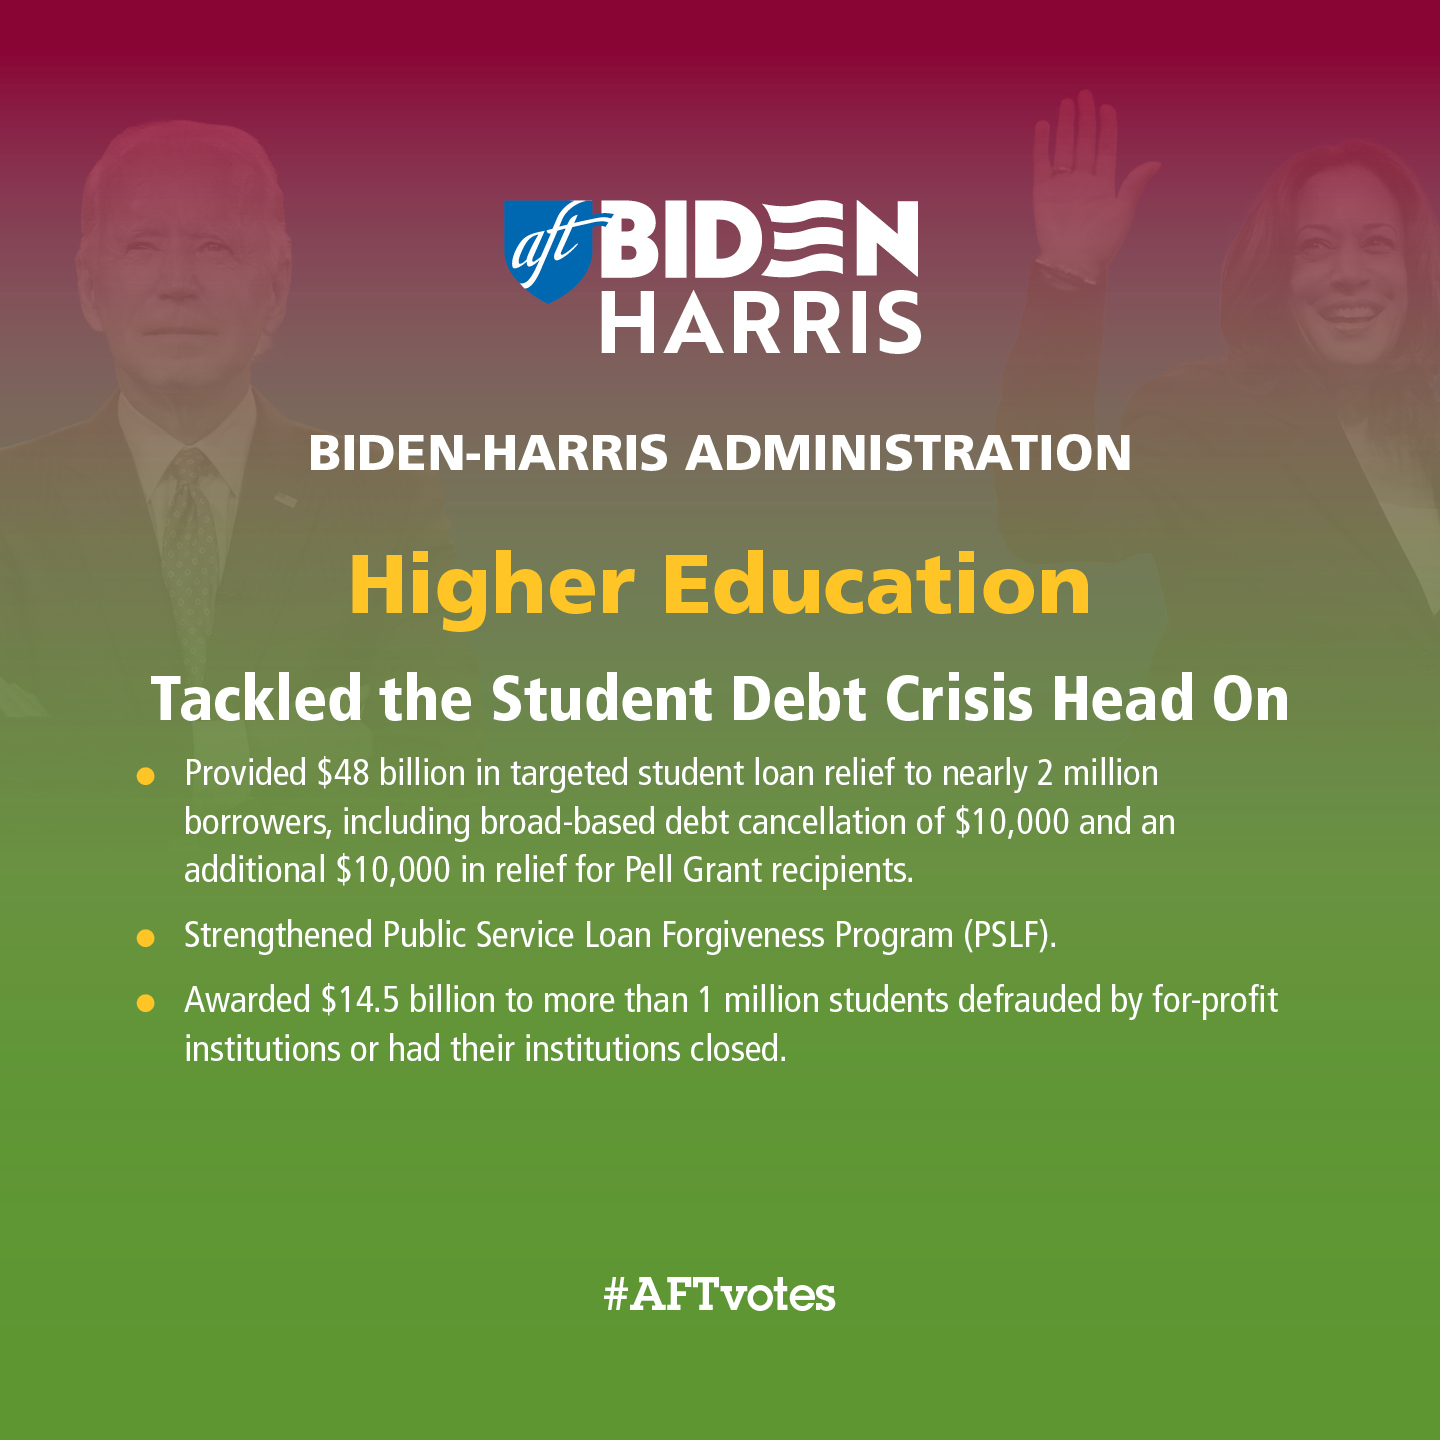 Tackled the Student Debt Crisis Head On